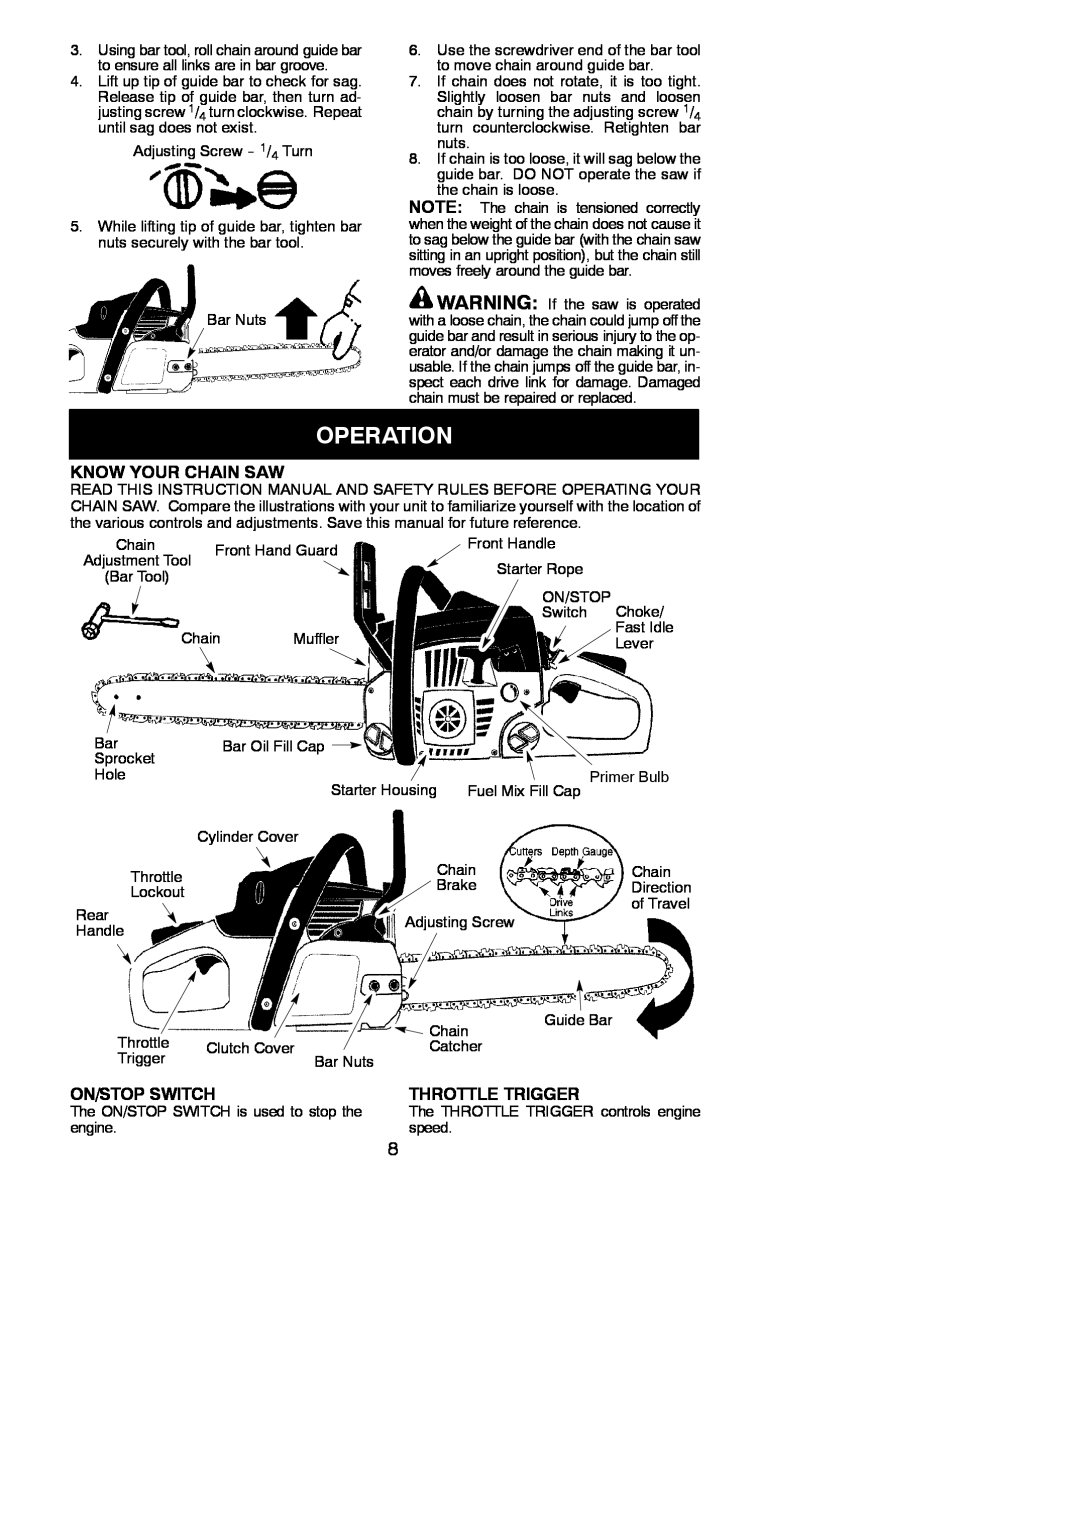 Poulan PP3416, 115156426 instruction manual Operation, Know Your Chain Saw, On/Stop Switch, Throttle Trigger 